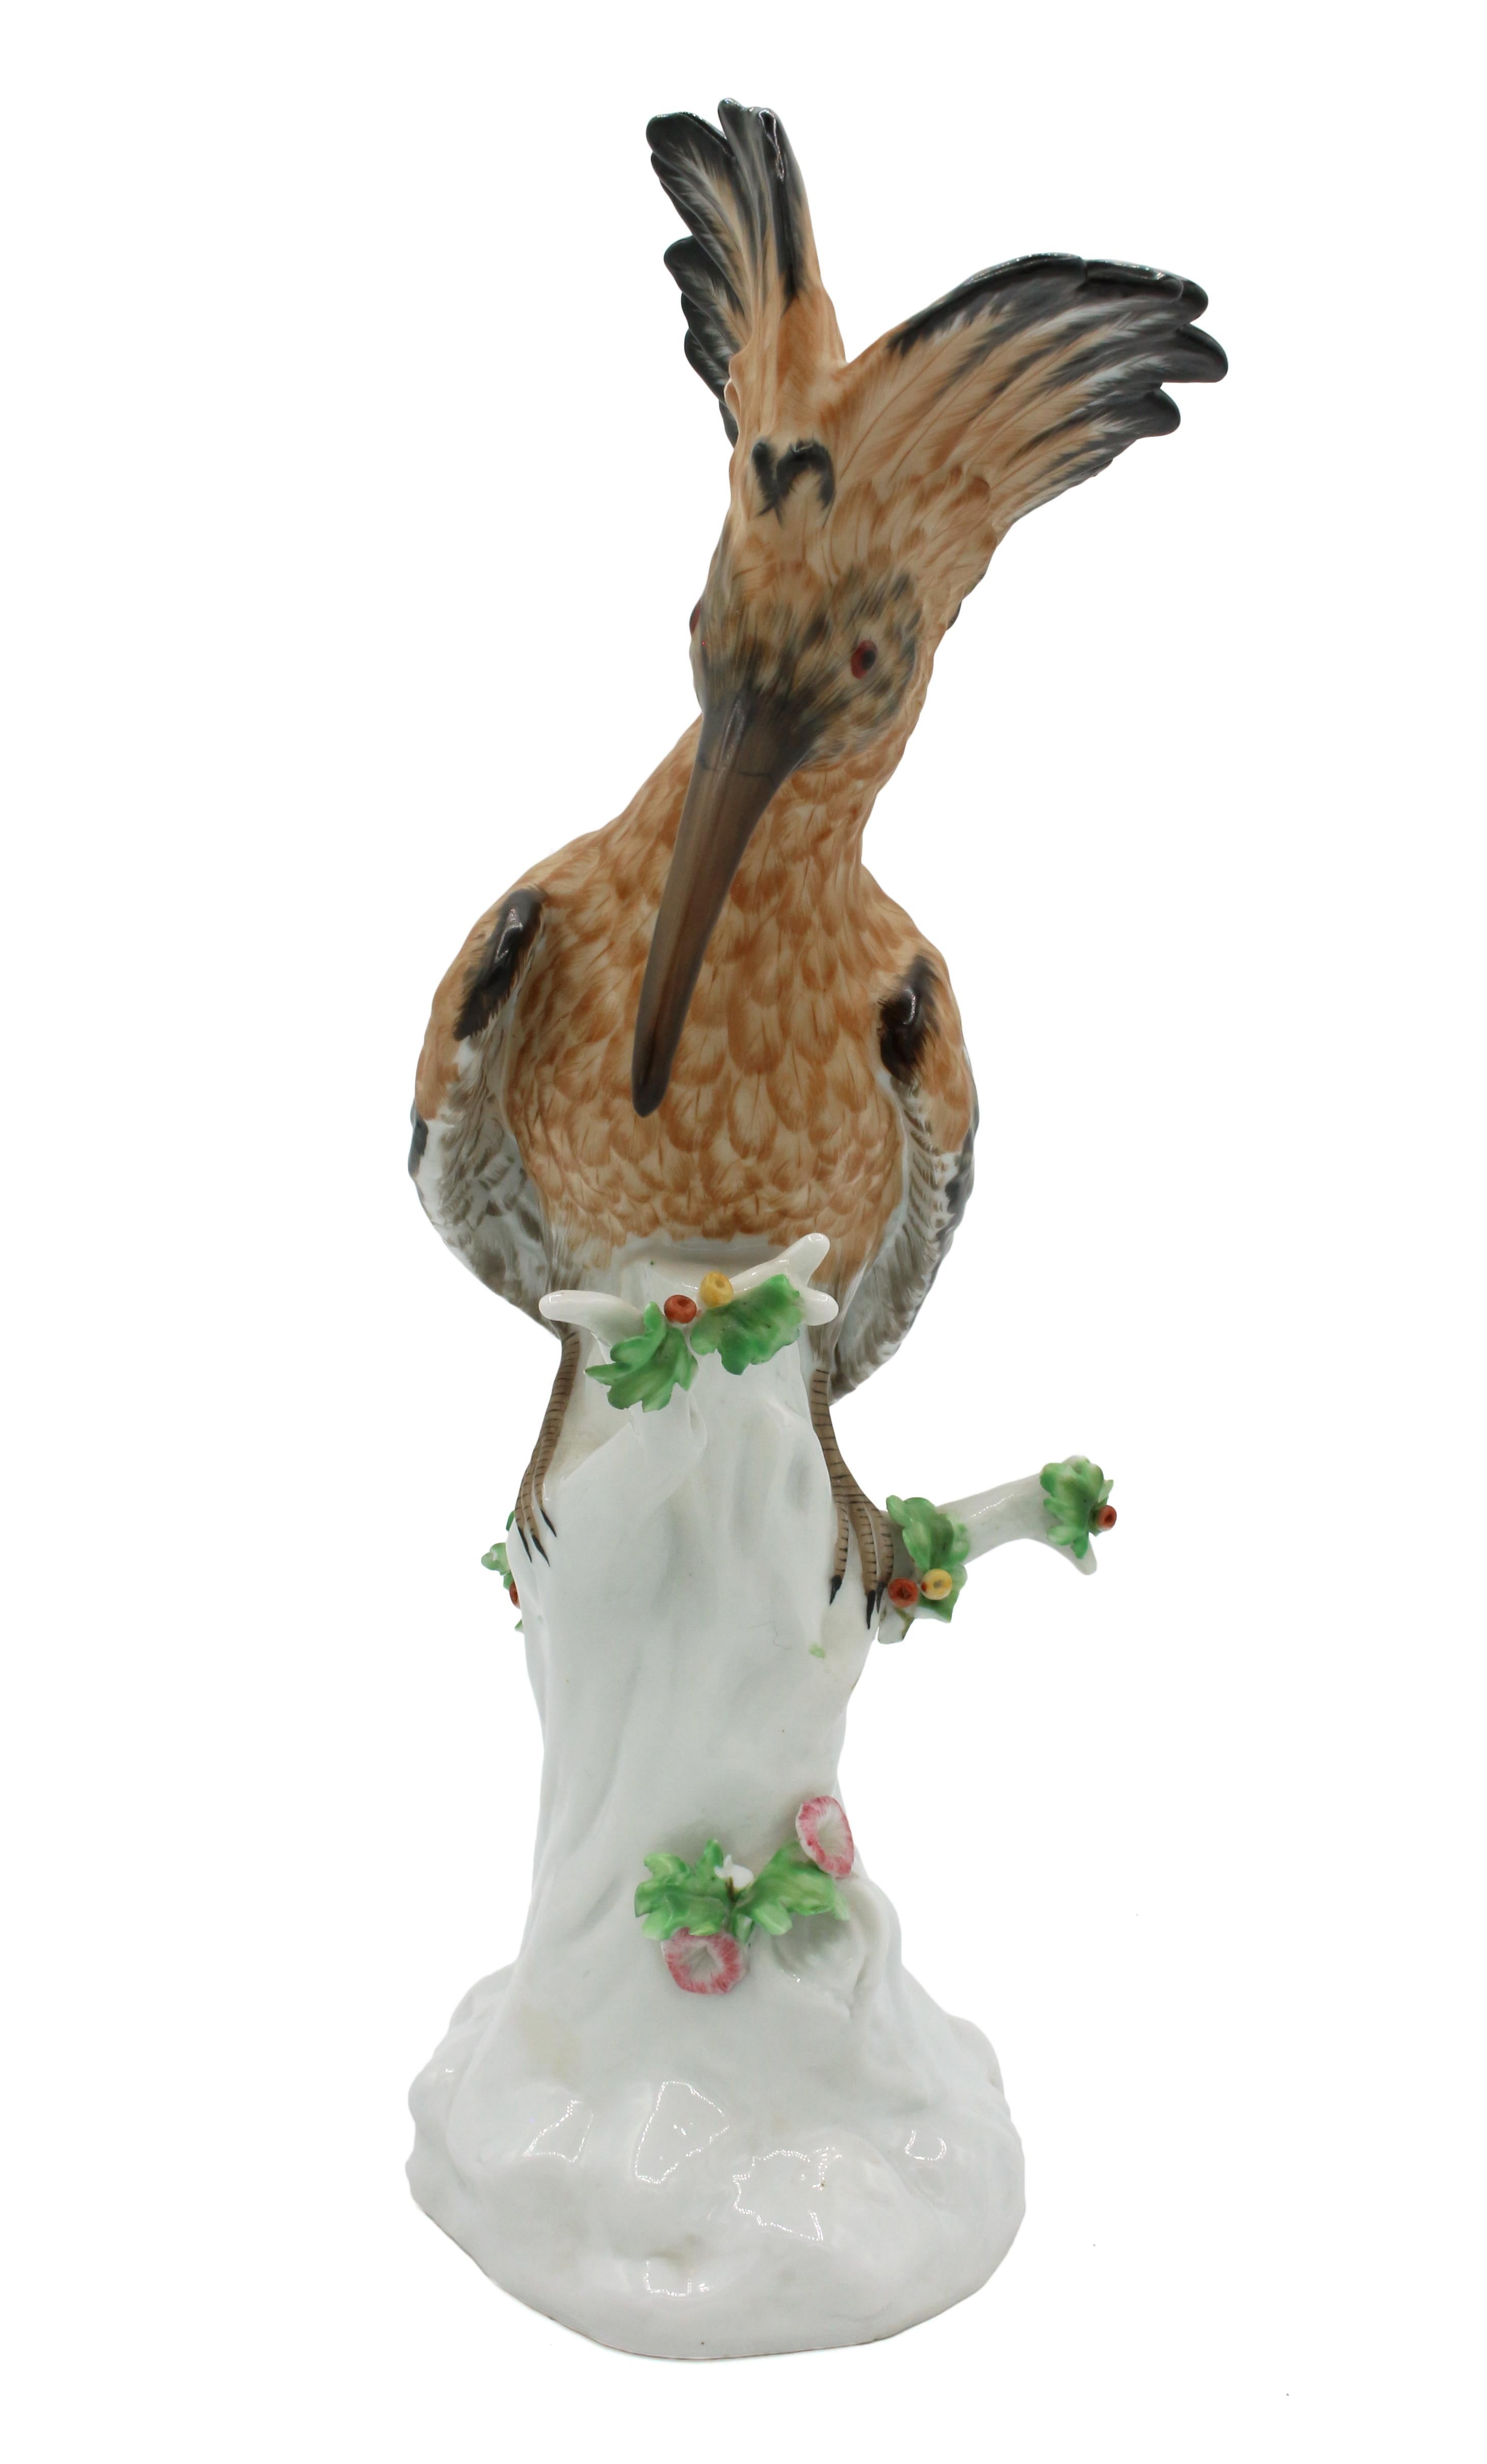 Mid-20th Century Italian Porcelain Hoopoe Bird Figurine In Good Condition For Sale In Chapel Hill, NC